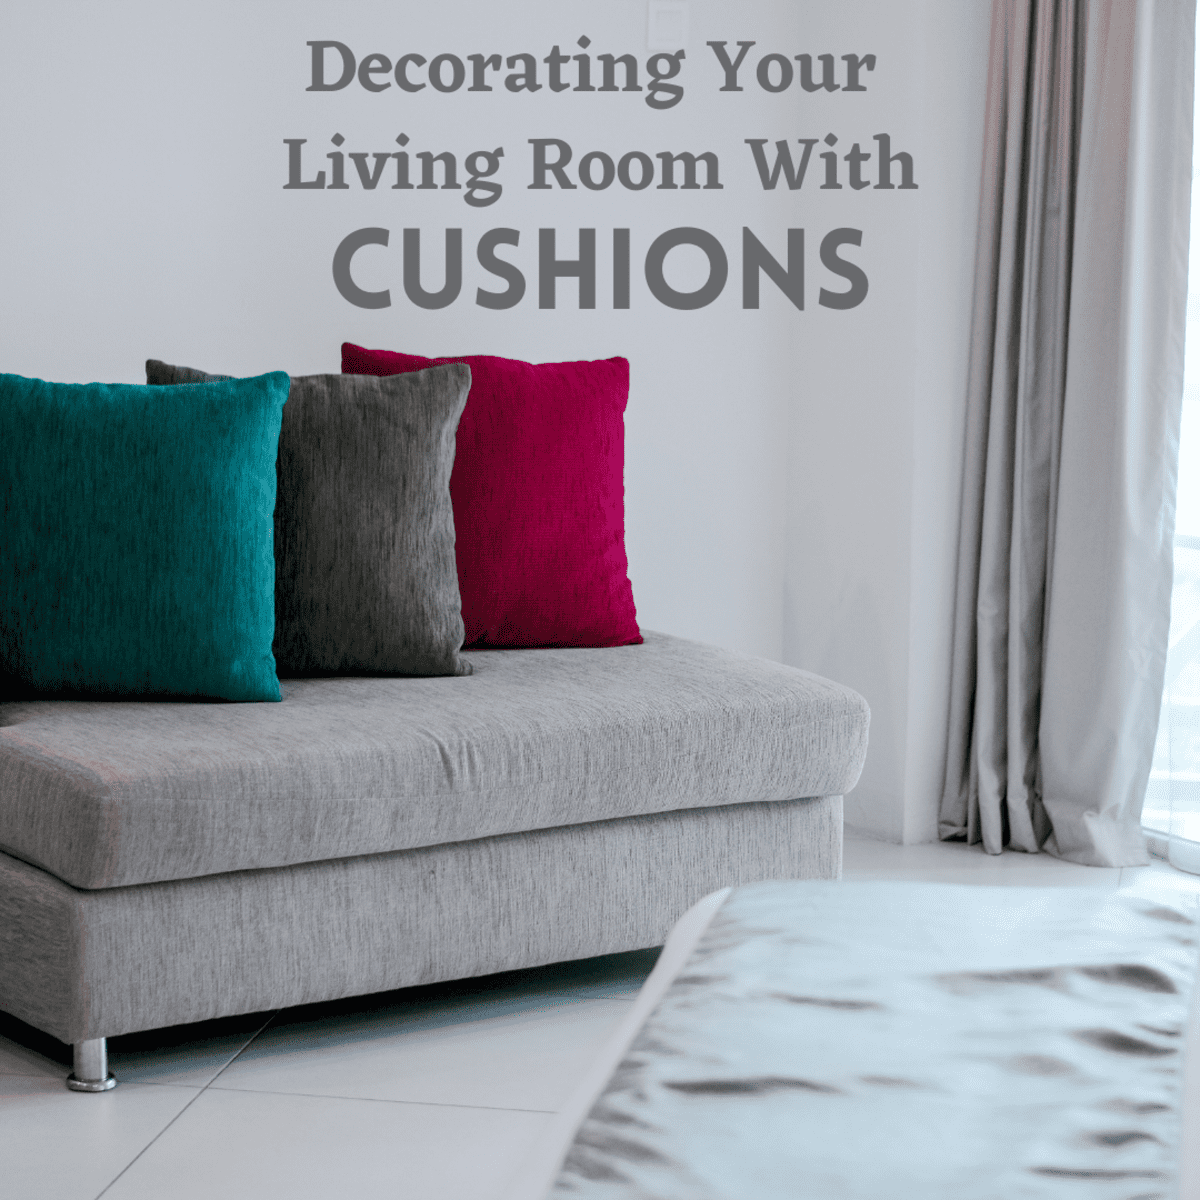 How to Decorate Your Living Room With Cushions - Dengarden